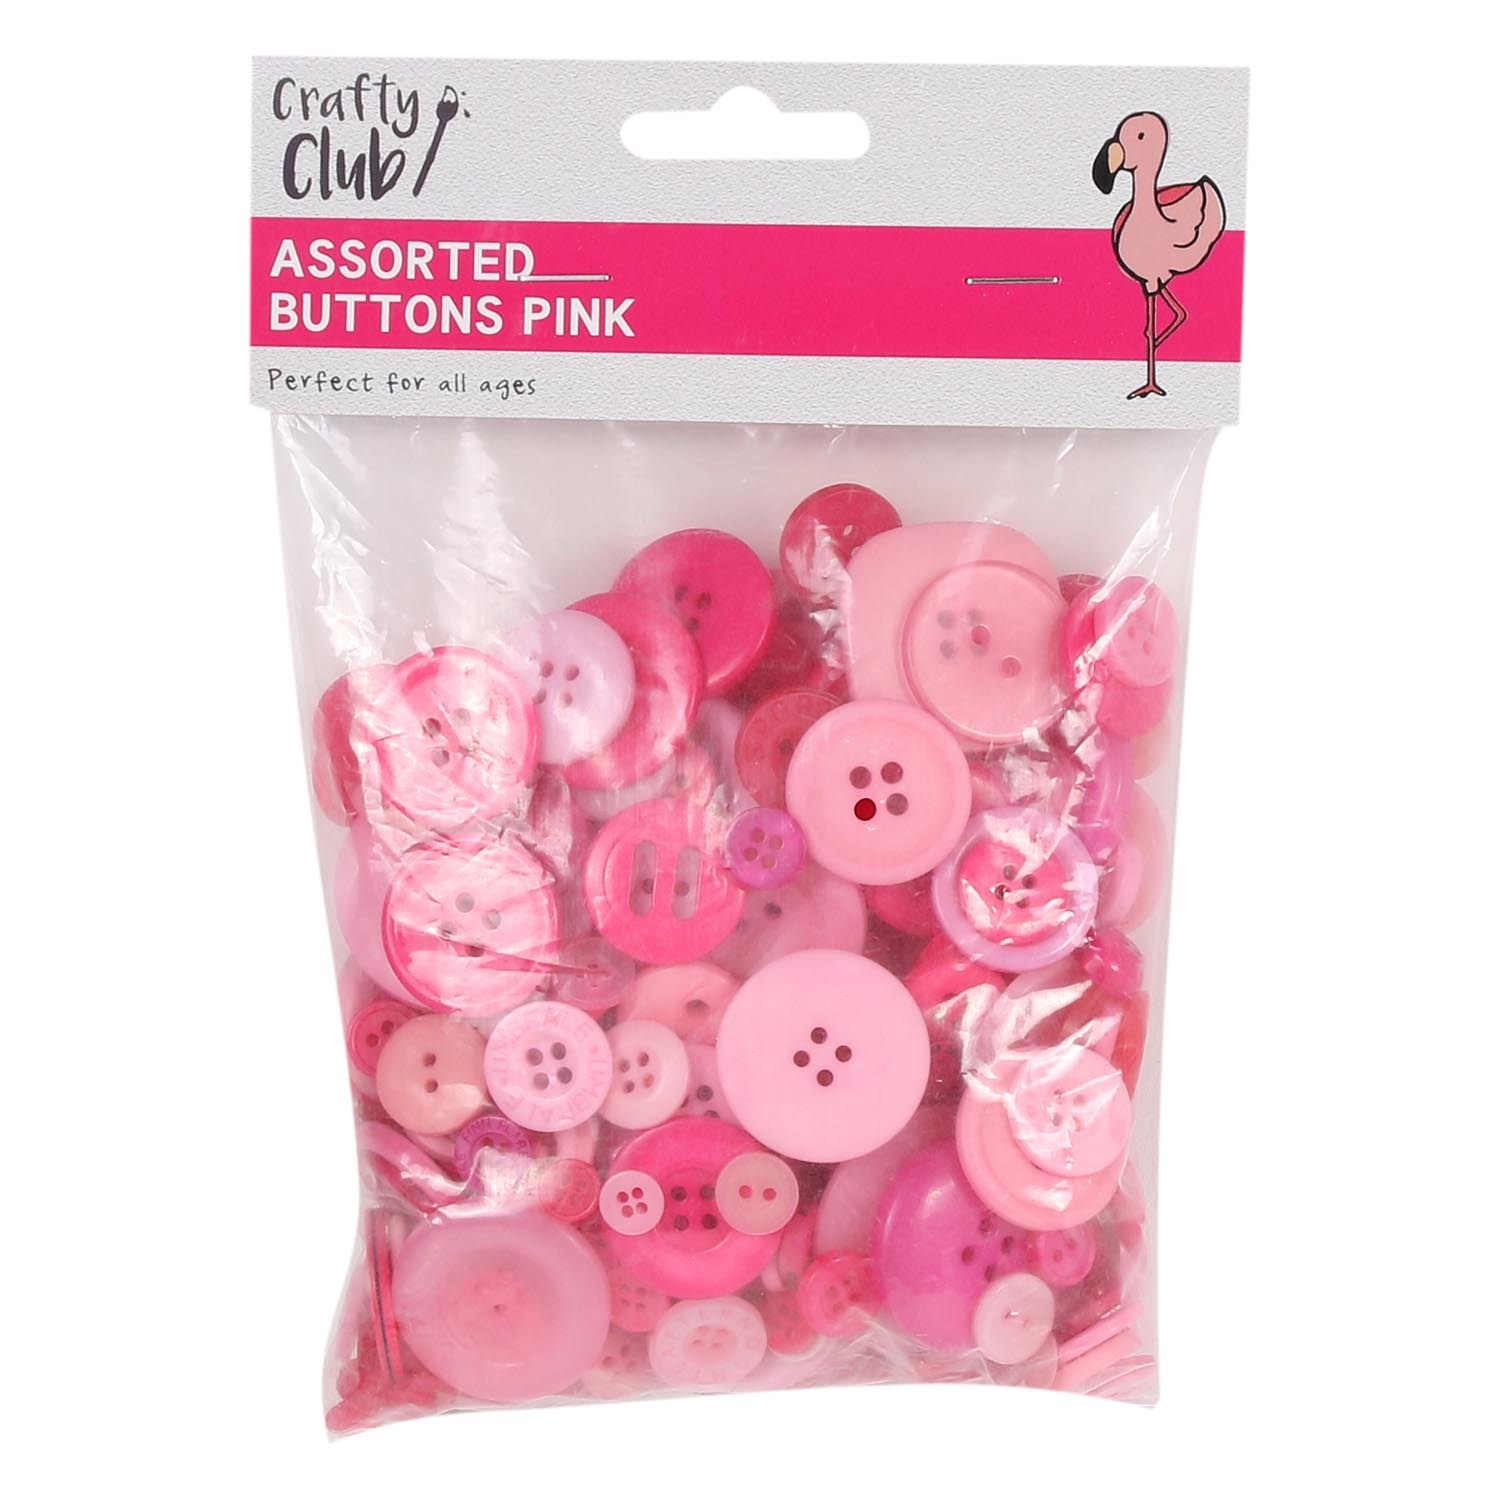 Crafty Club Assorted Buttons - Pink Image